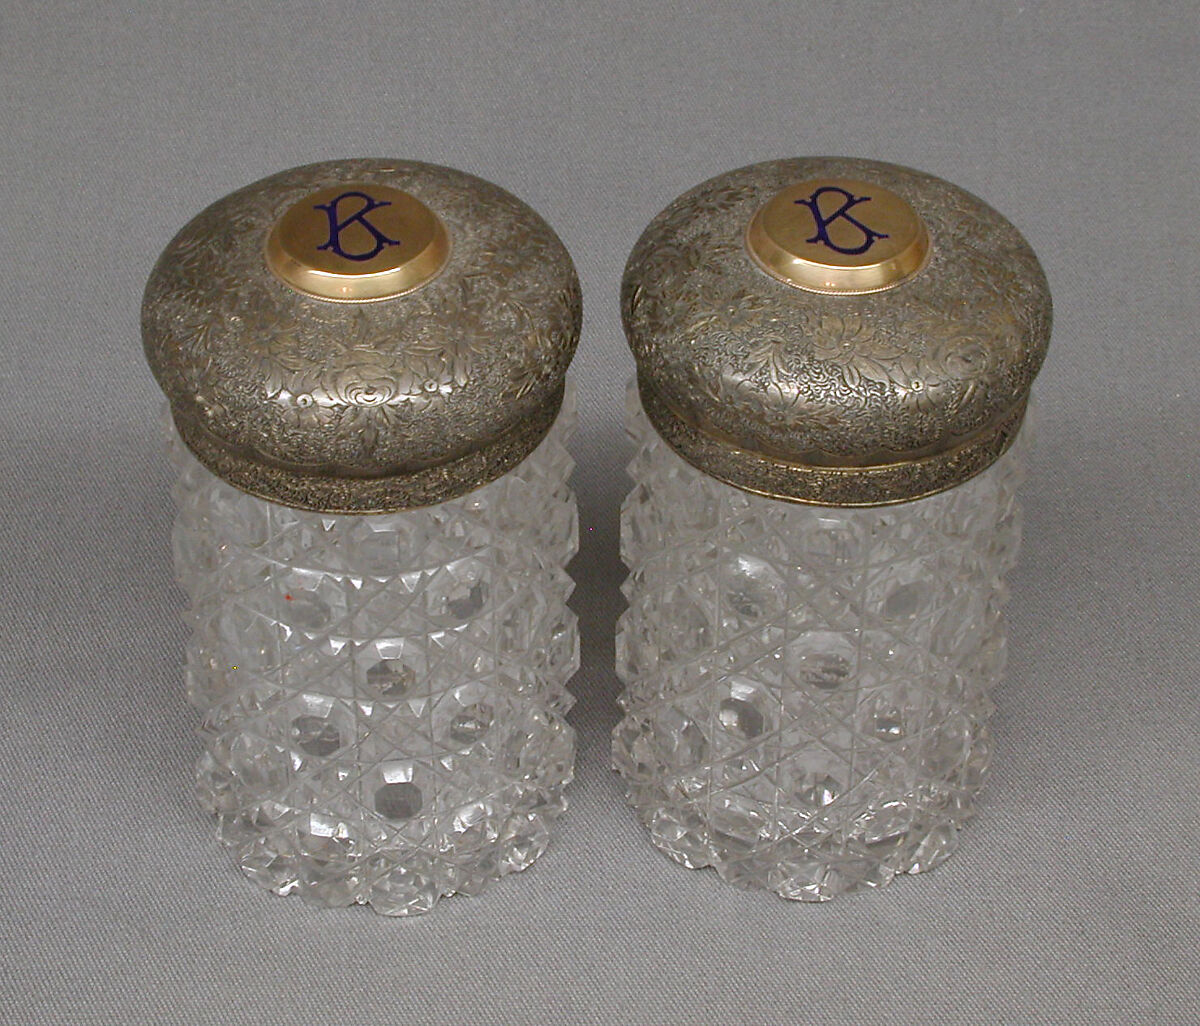 Bottle with cover, Barnard Brothers, Silver, glass, British, London 